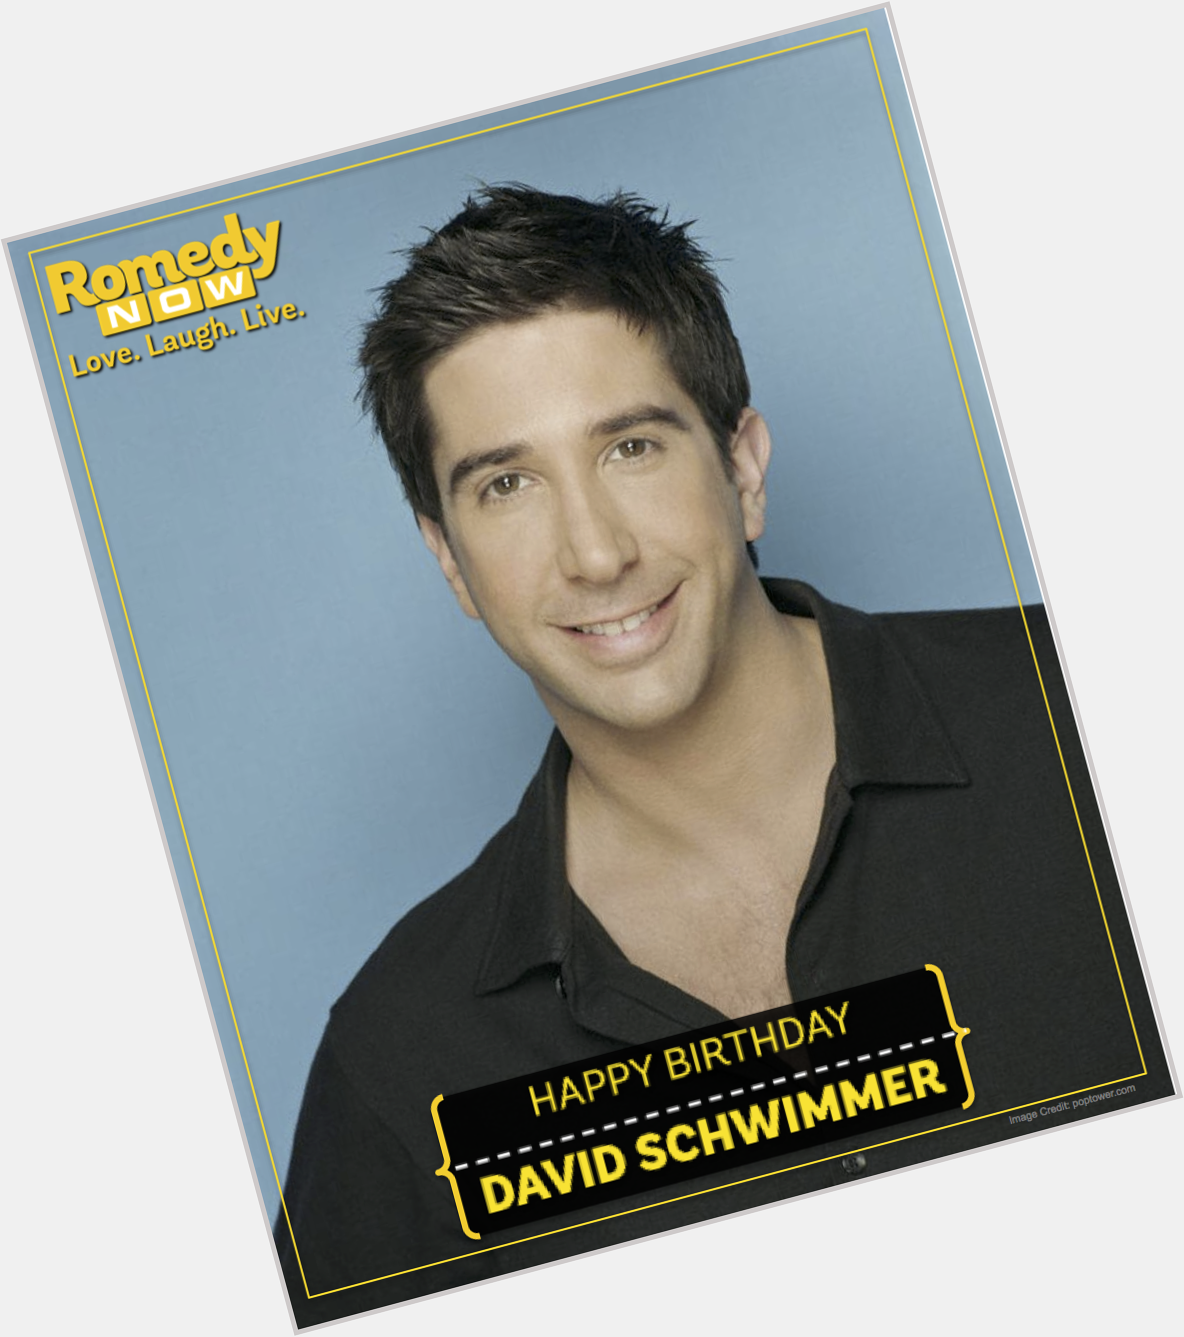 Happy Birthday David Schwimmer, a.k.a Ross Gellar . :) May the FRIENDS be with you on your special day 